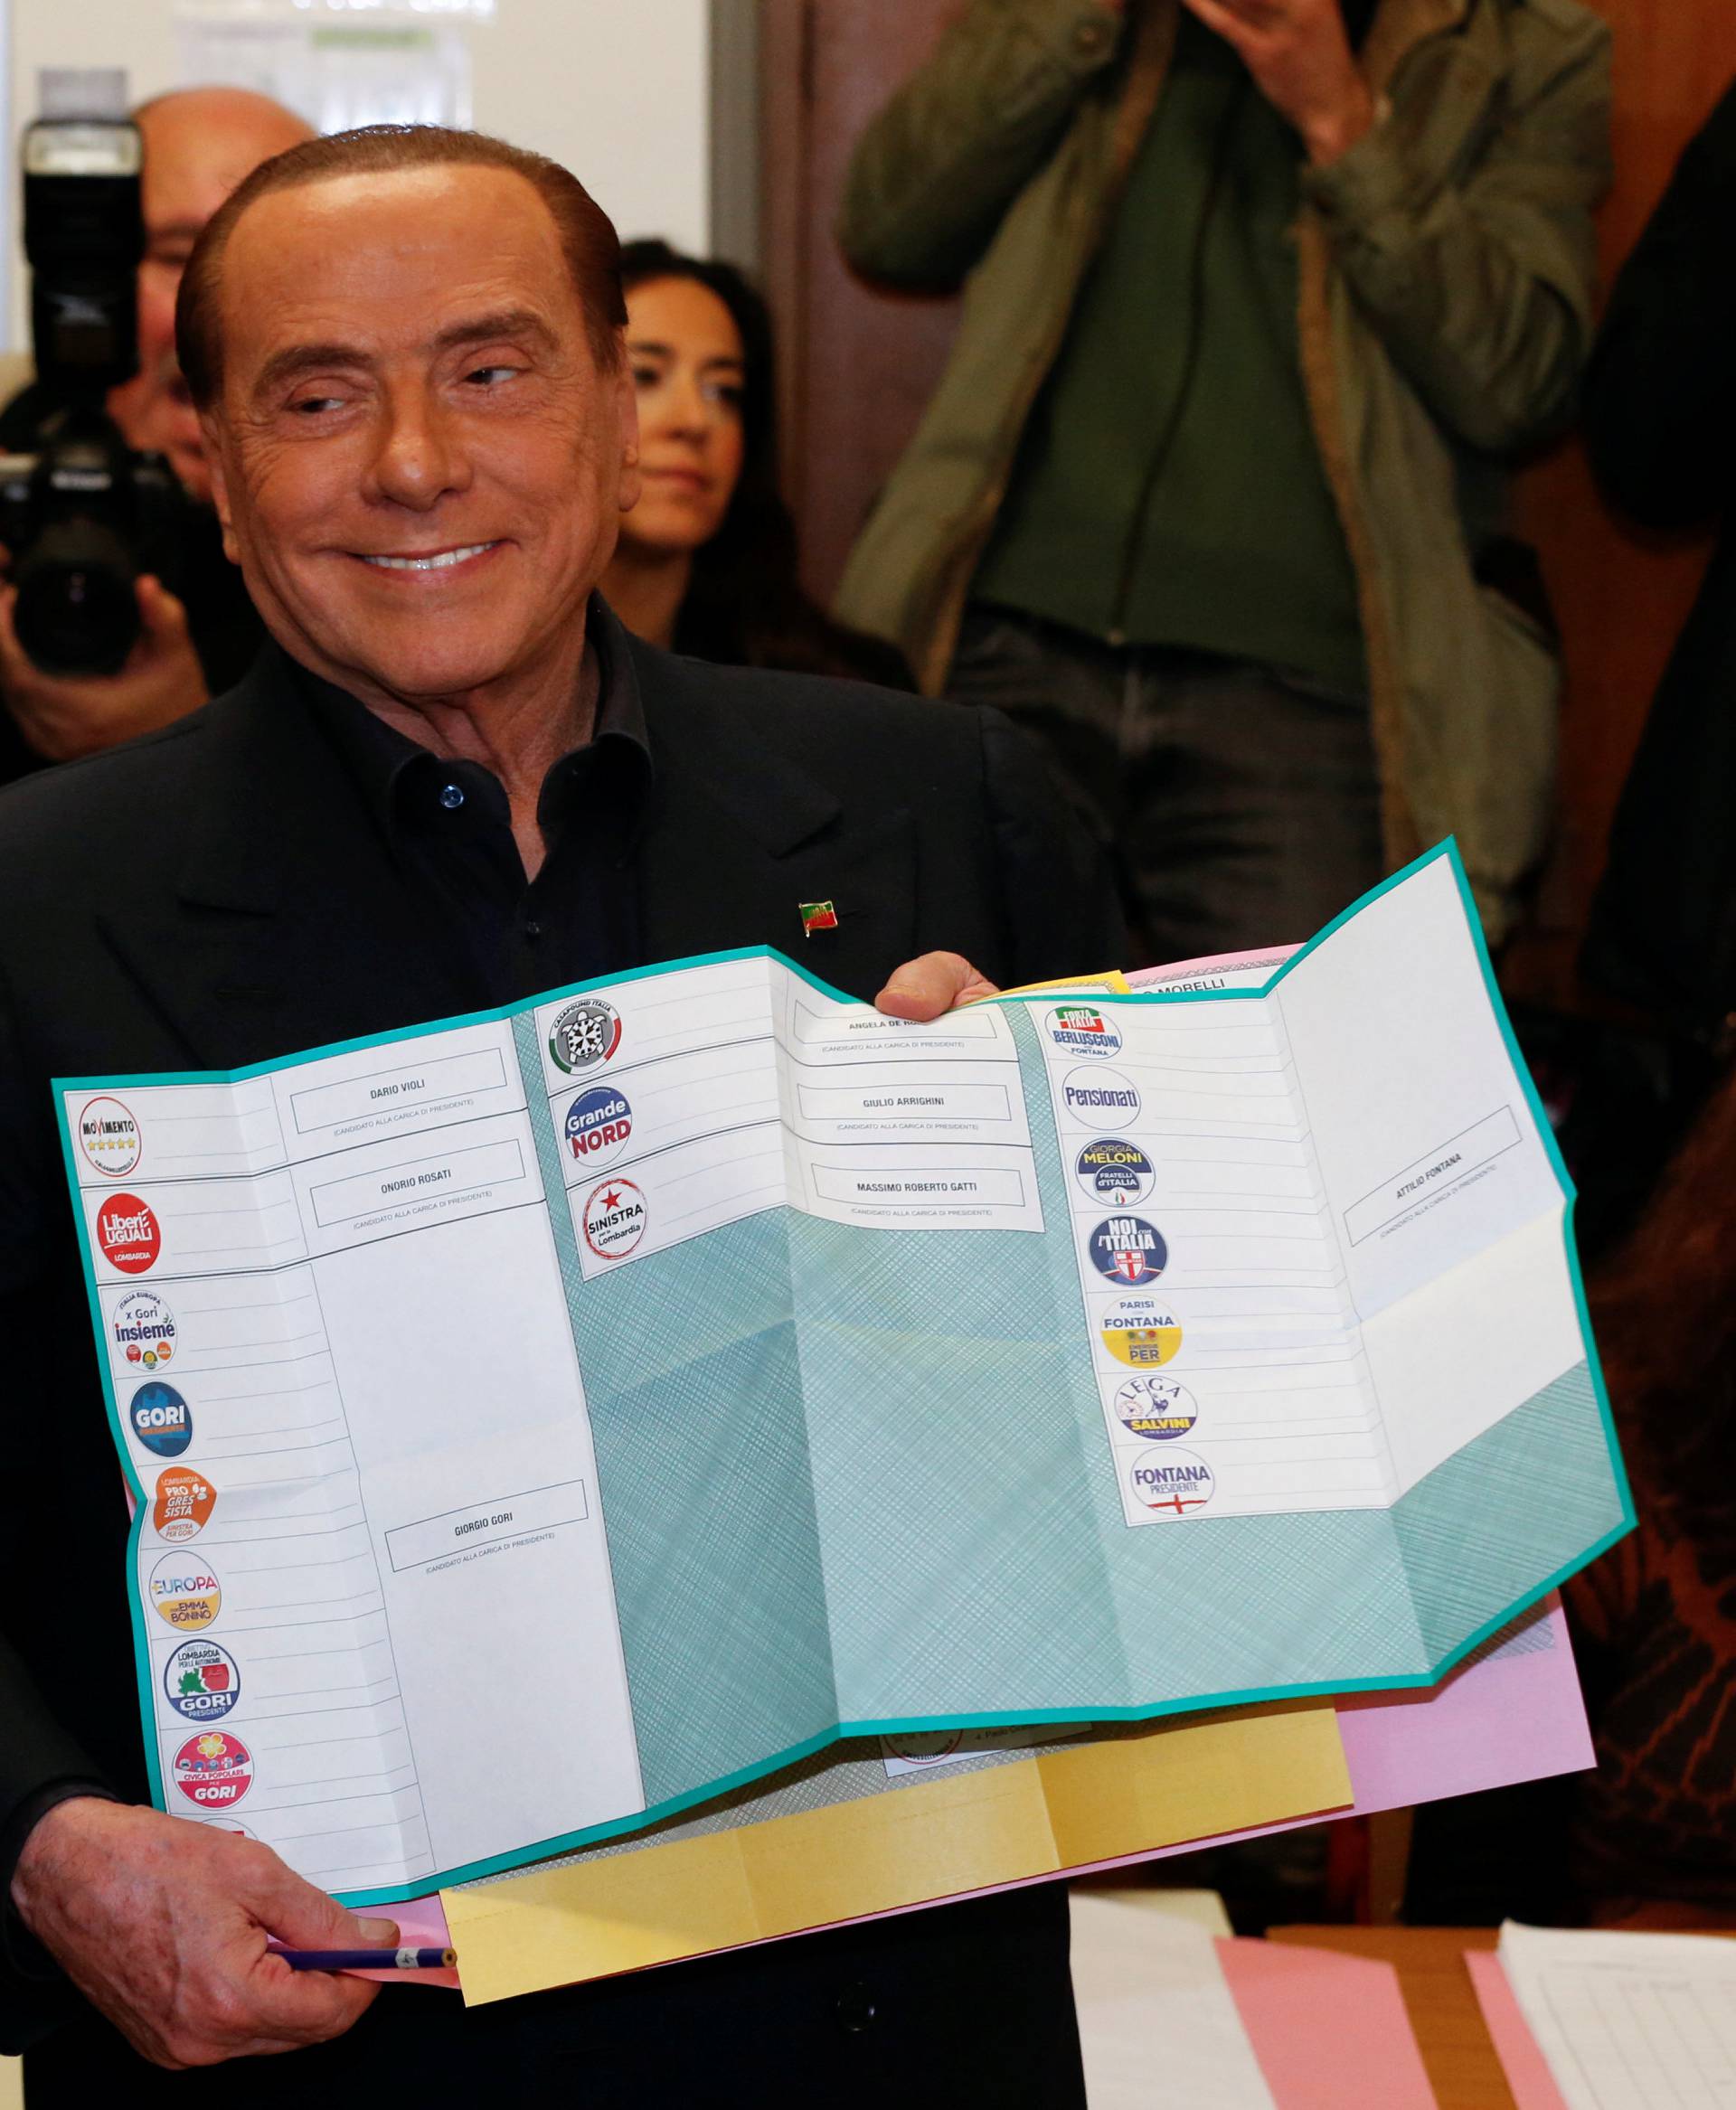 Forza Italia party leader Silvio Berlusconi holds his ballot as he prepares to cast his vote at a polling station in in Milan